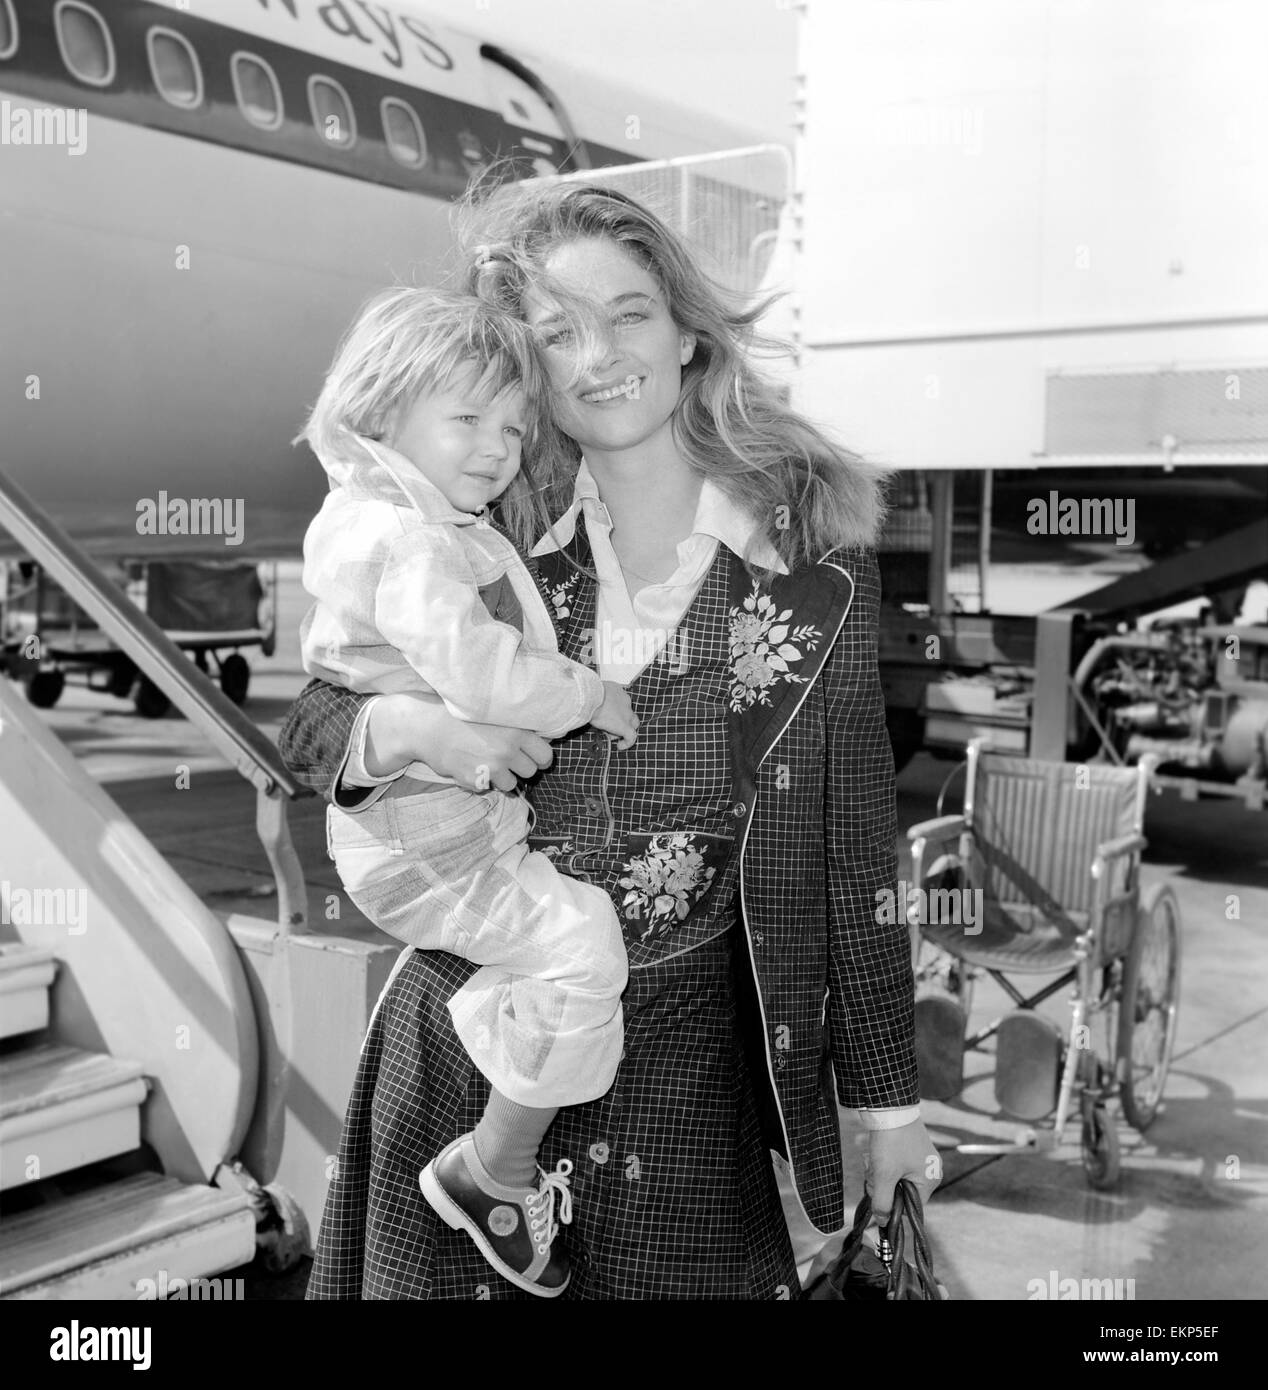 British actress Charlotte Rampling arrived at Heathrow Airport and announced that her latest film 'The Night Porter' is 'hotter than 'Last Tango in Paris'. Charlotte Rampling with her son Barnaby at Heathrow Airport today. September 1974 74-5696-006 Stock Photo